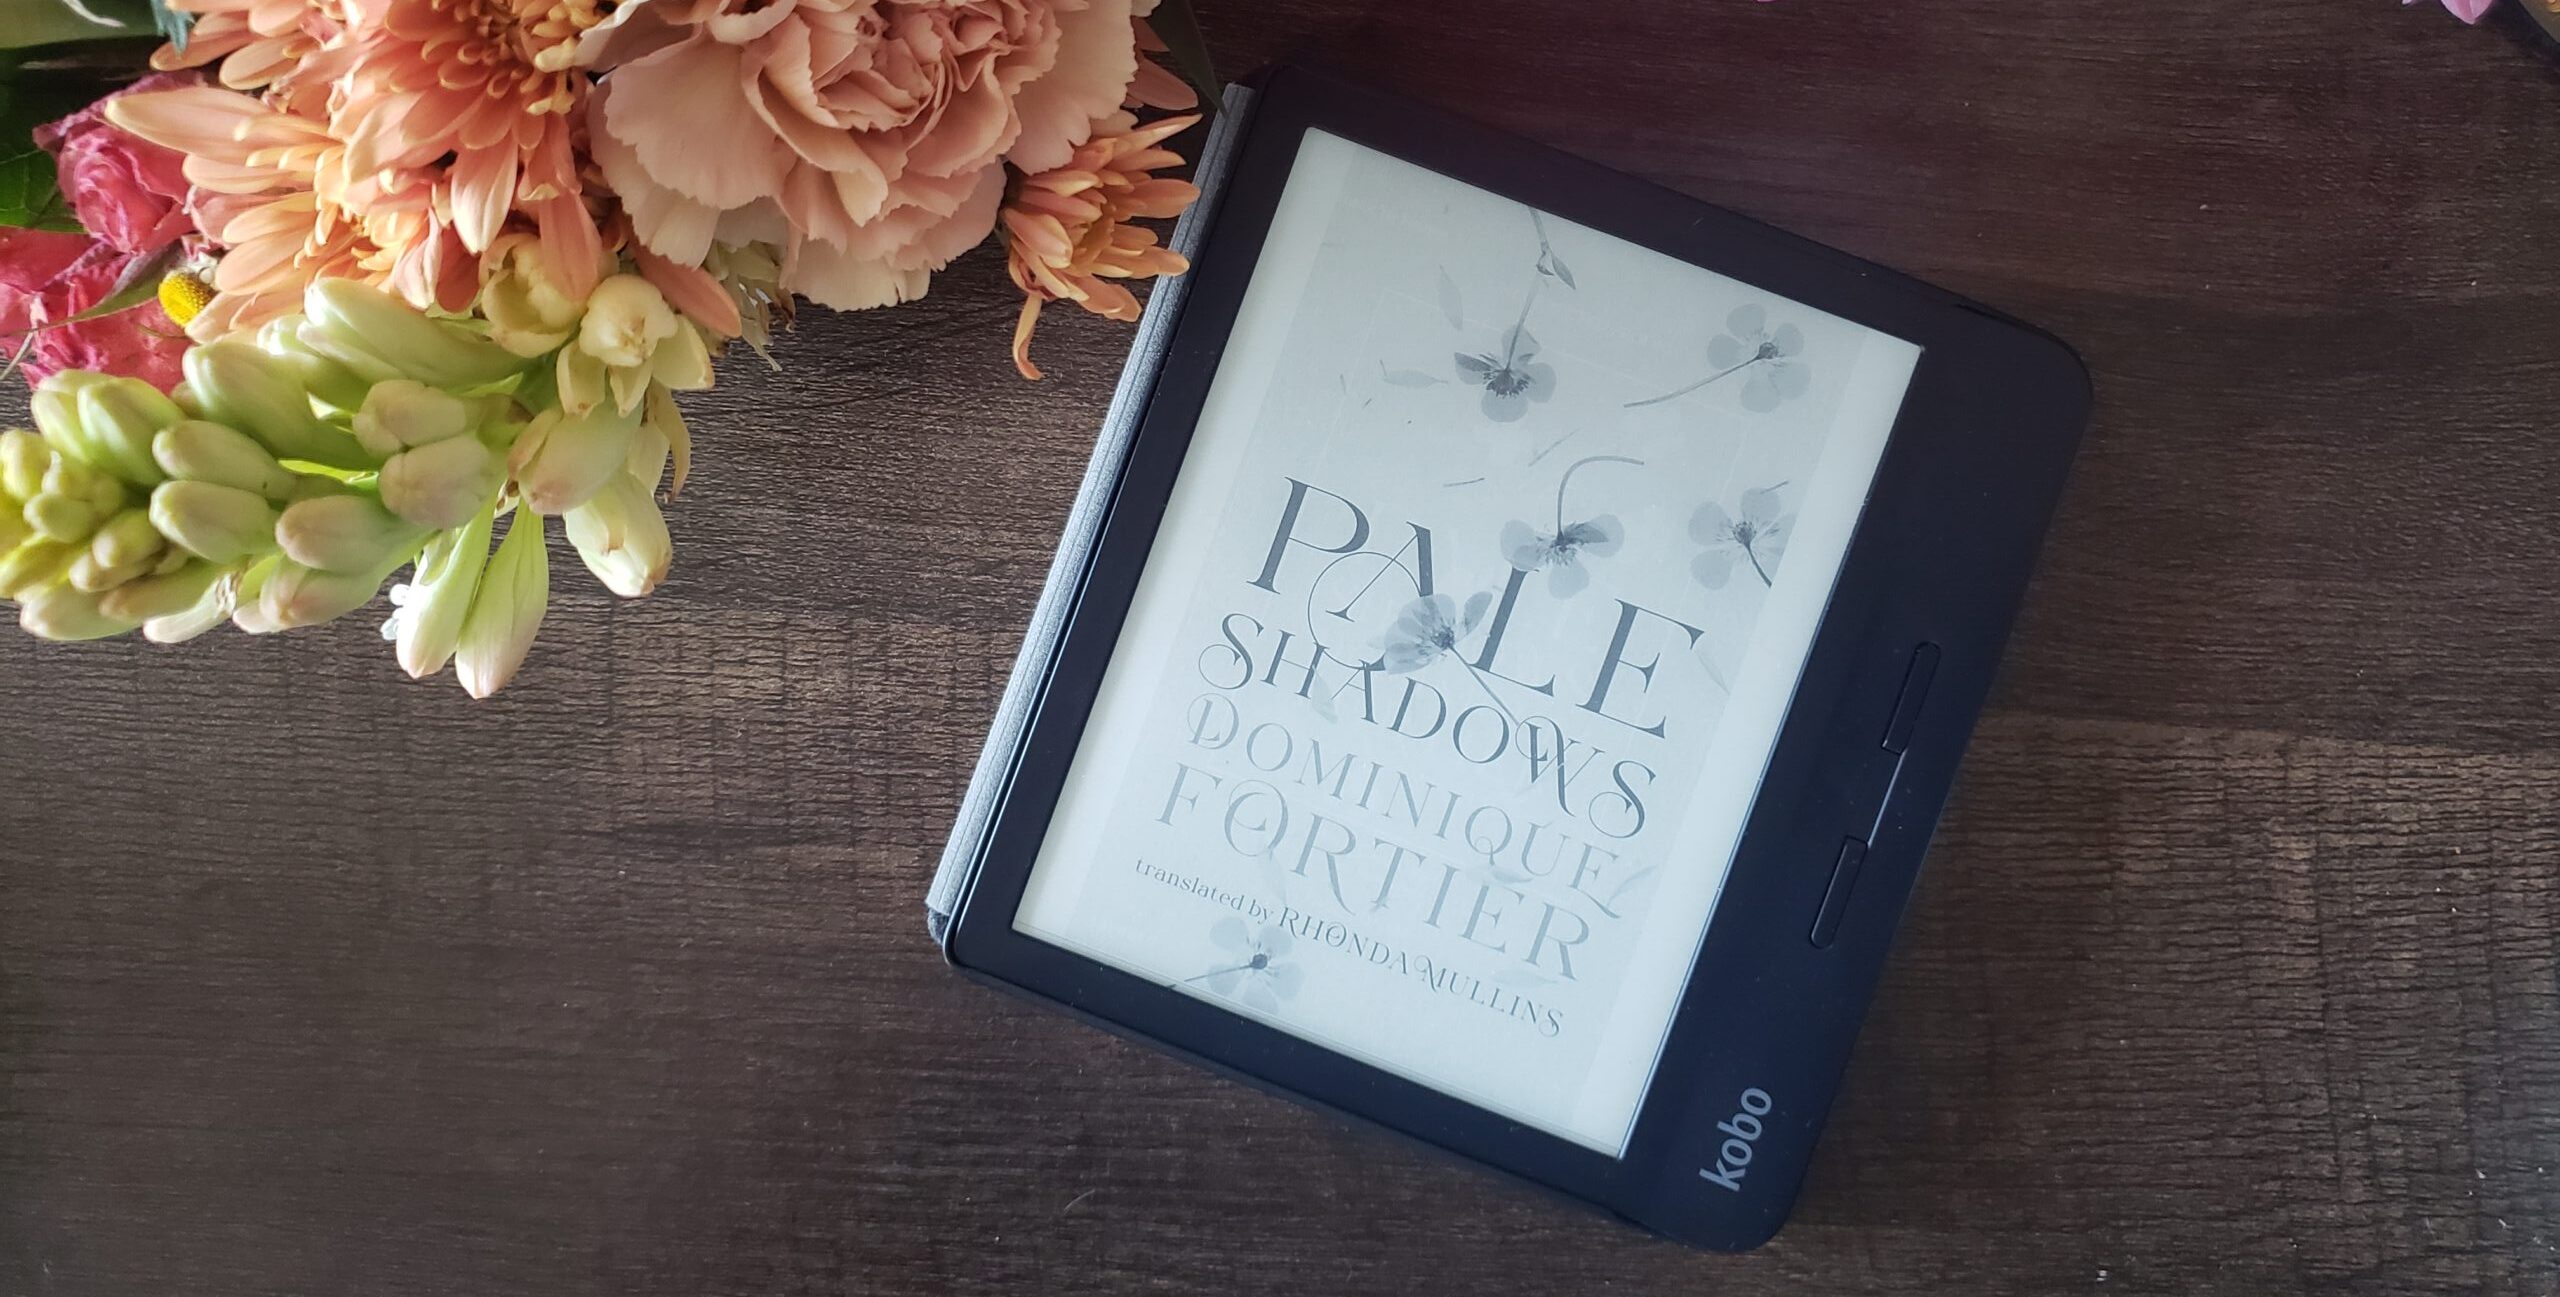 140: Pale Shadows by Dominique Fortier